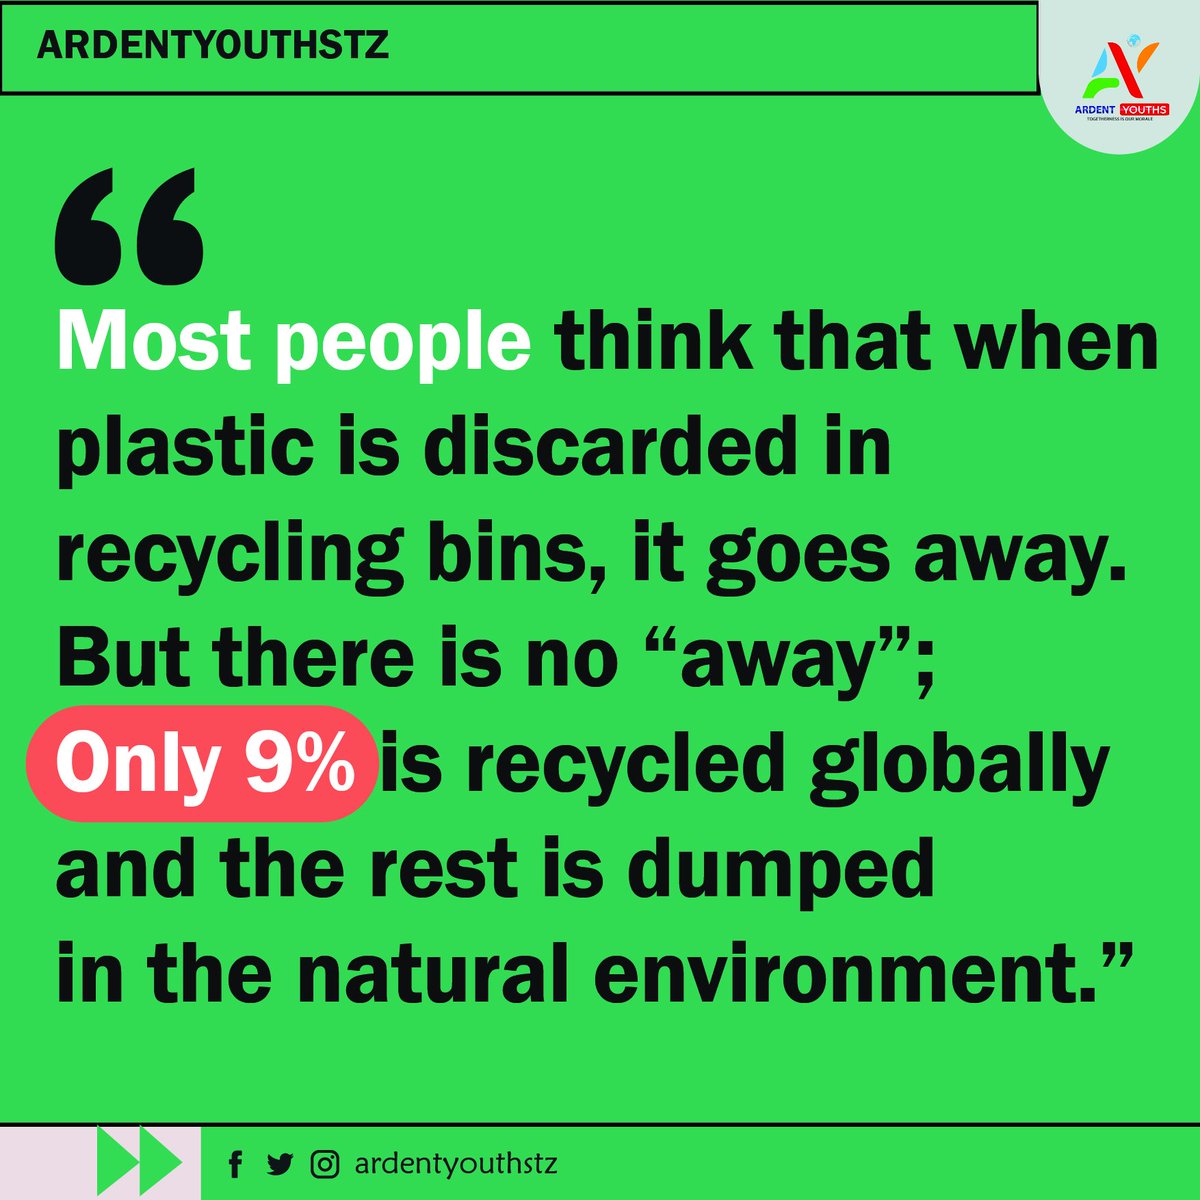 Most people think that when plastic is discarded in recycling bins, it goes away. But there is no 'away'. Only 9% is recycled globally and the rest is dumped in the natural environment.

#ZeroPlastic #Recycling #ReUse #4Rs #sustainablecommunities #ArdentYouths #Sustainability